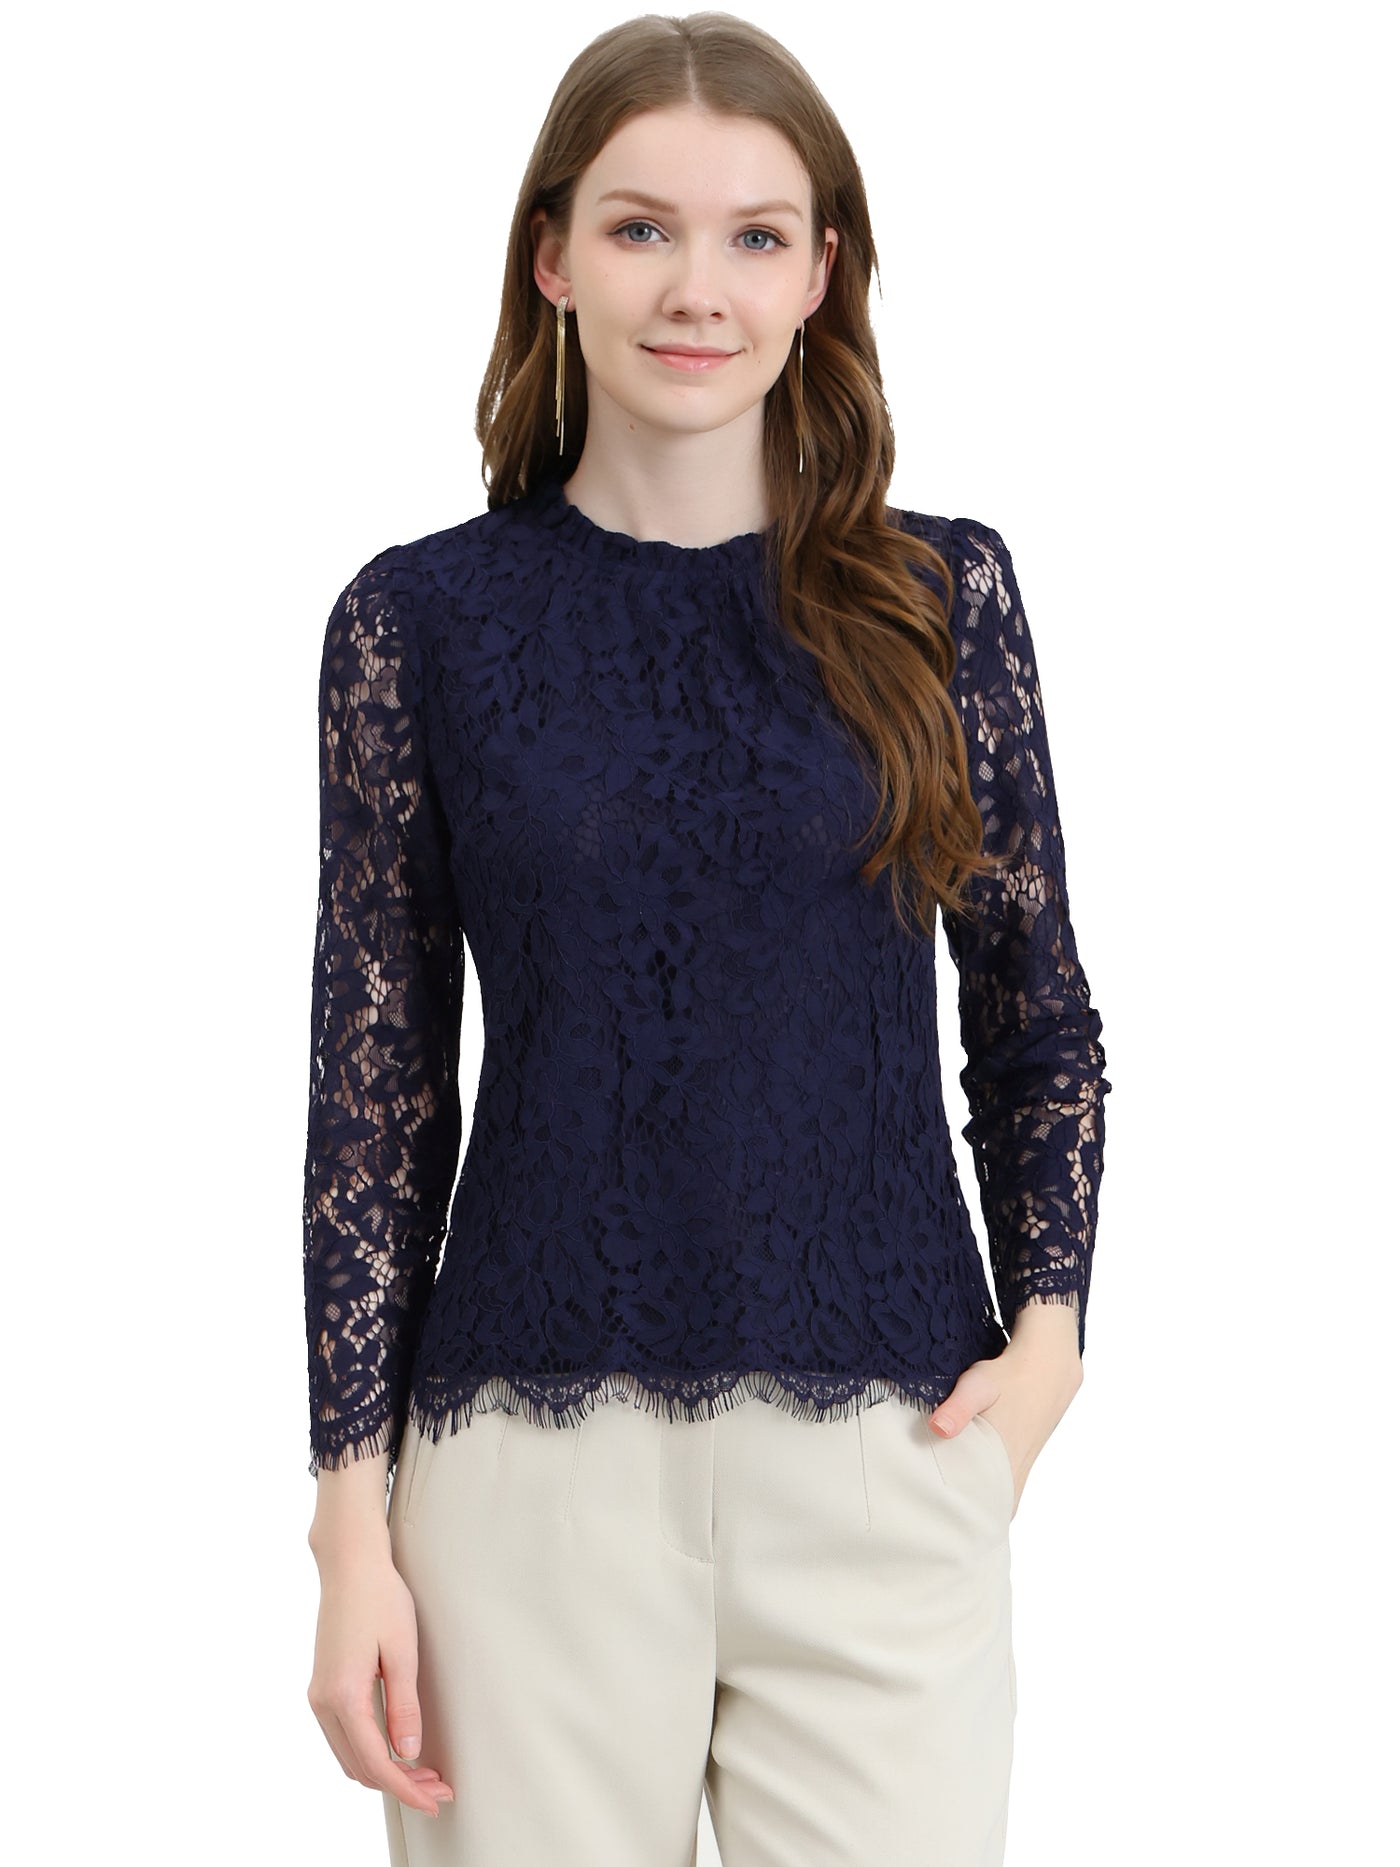 Allegra K Lace Long Sleeve Ruffle Stand Neck Floral Blouse